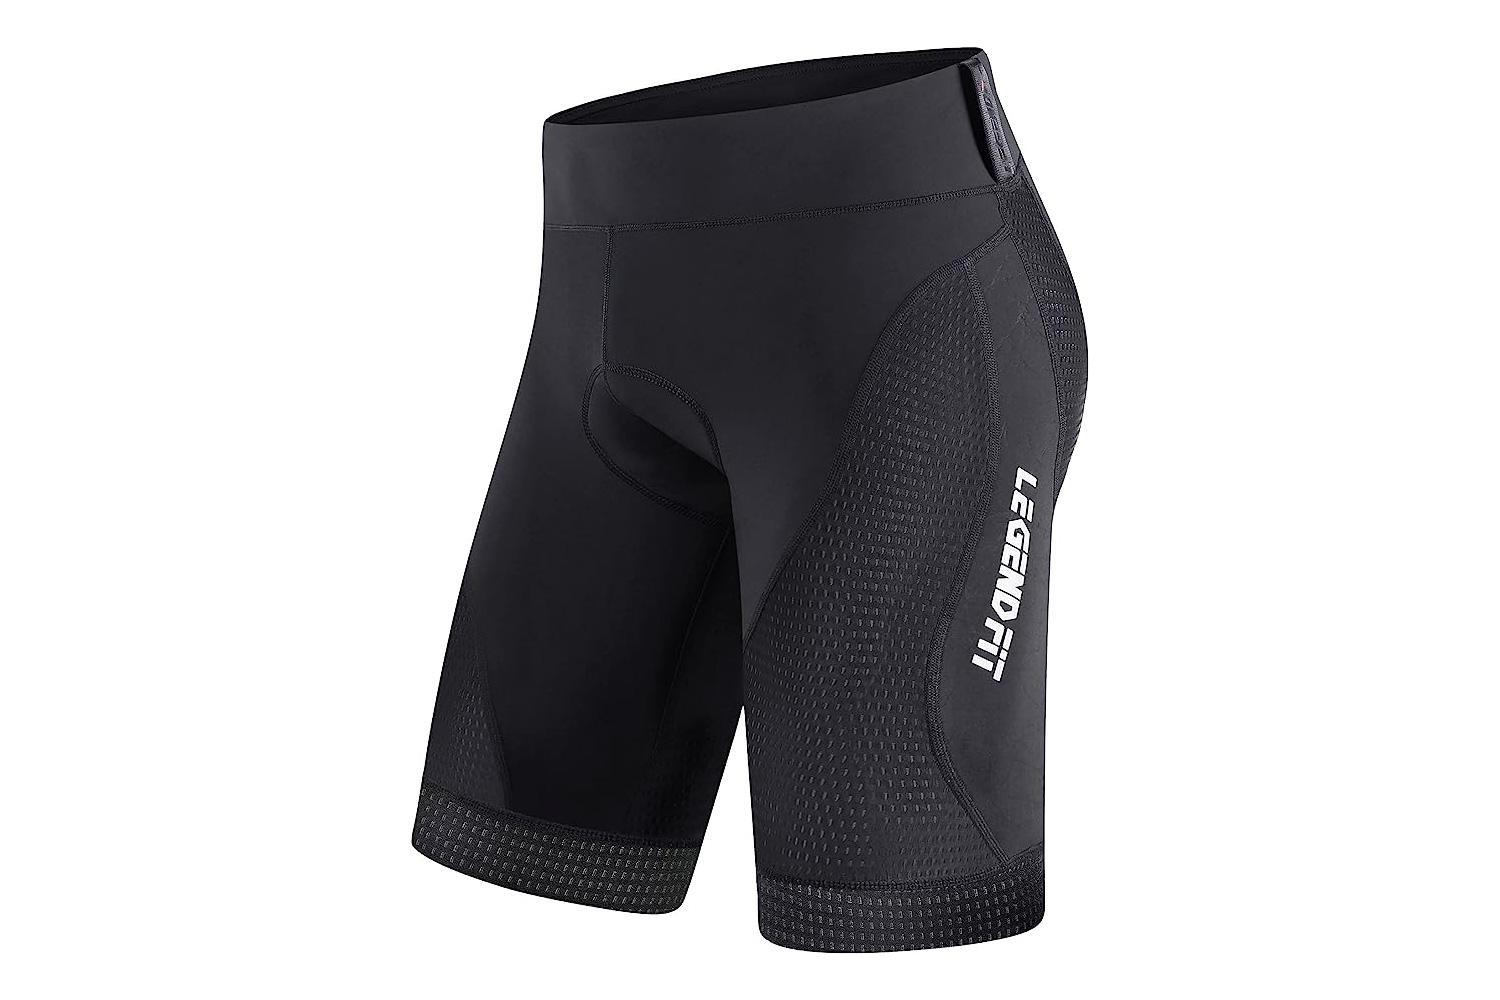 Back in the saddle: Get ready to ride with the best cycling shorts for men  - The Manual